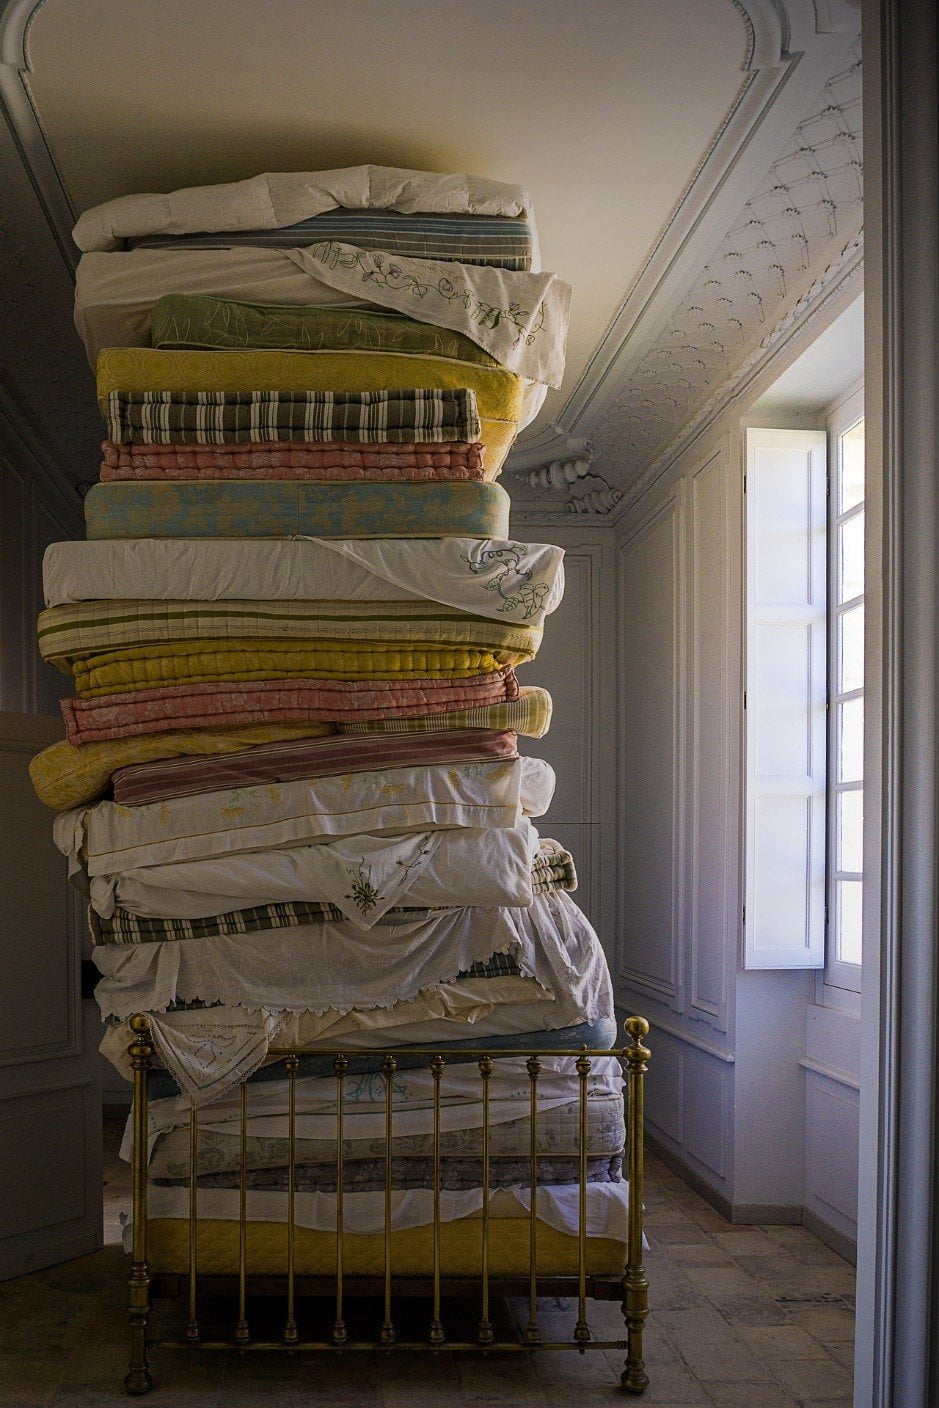 20 Ways to Upcycle Bed Sheets